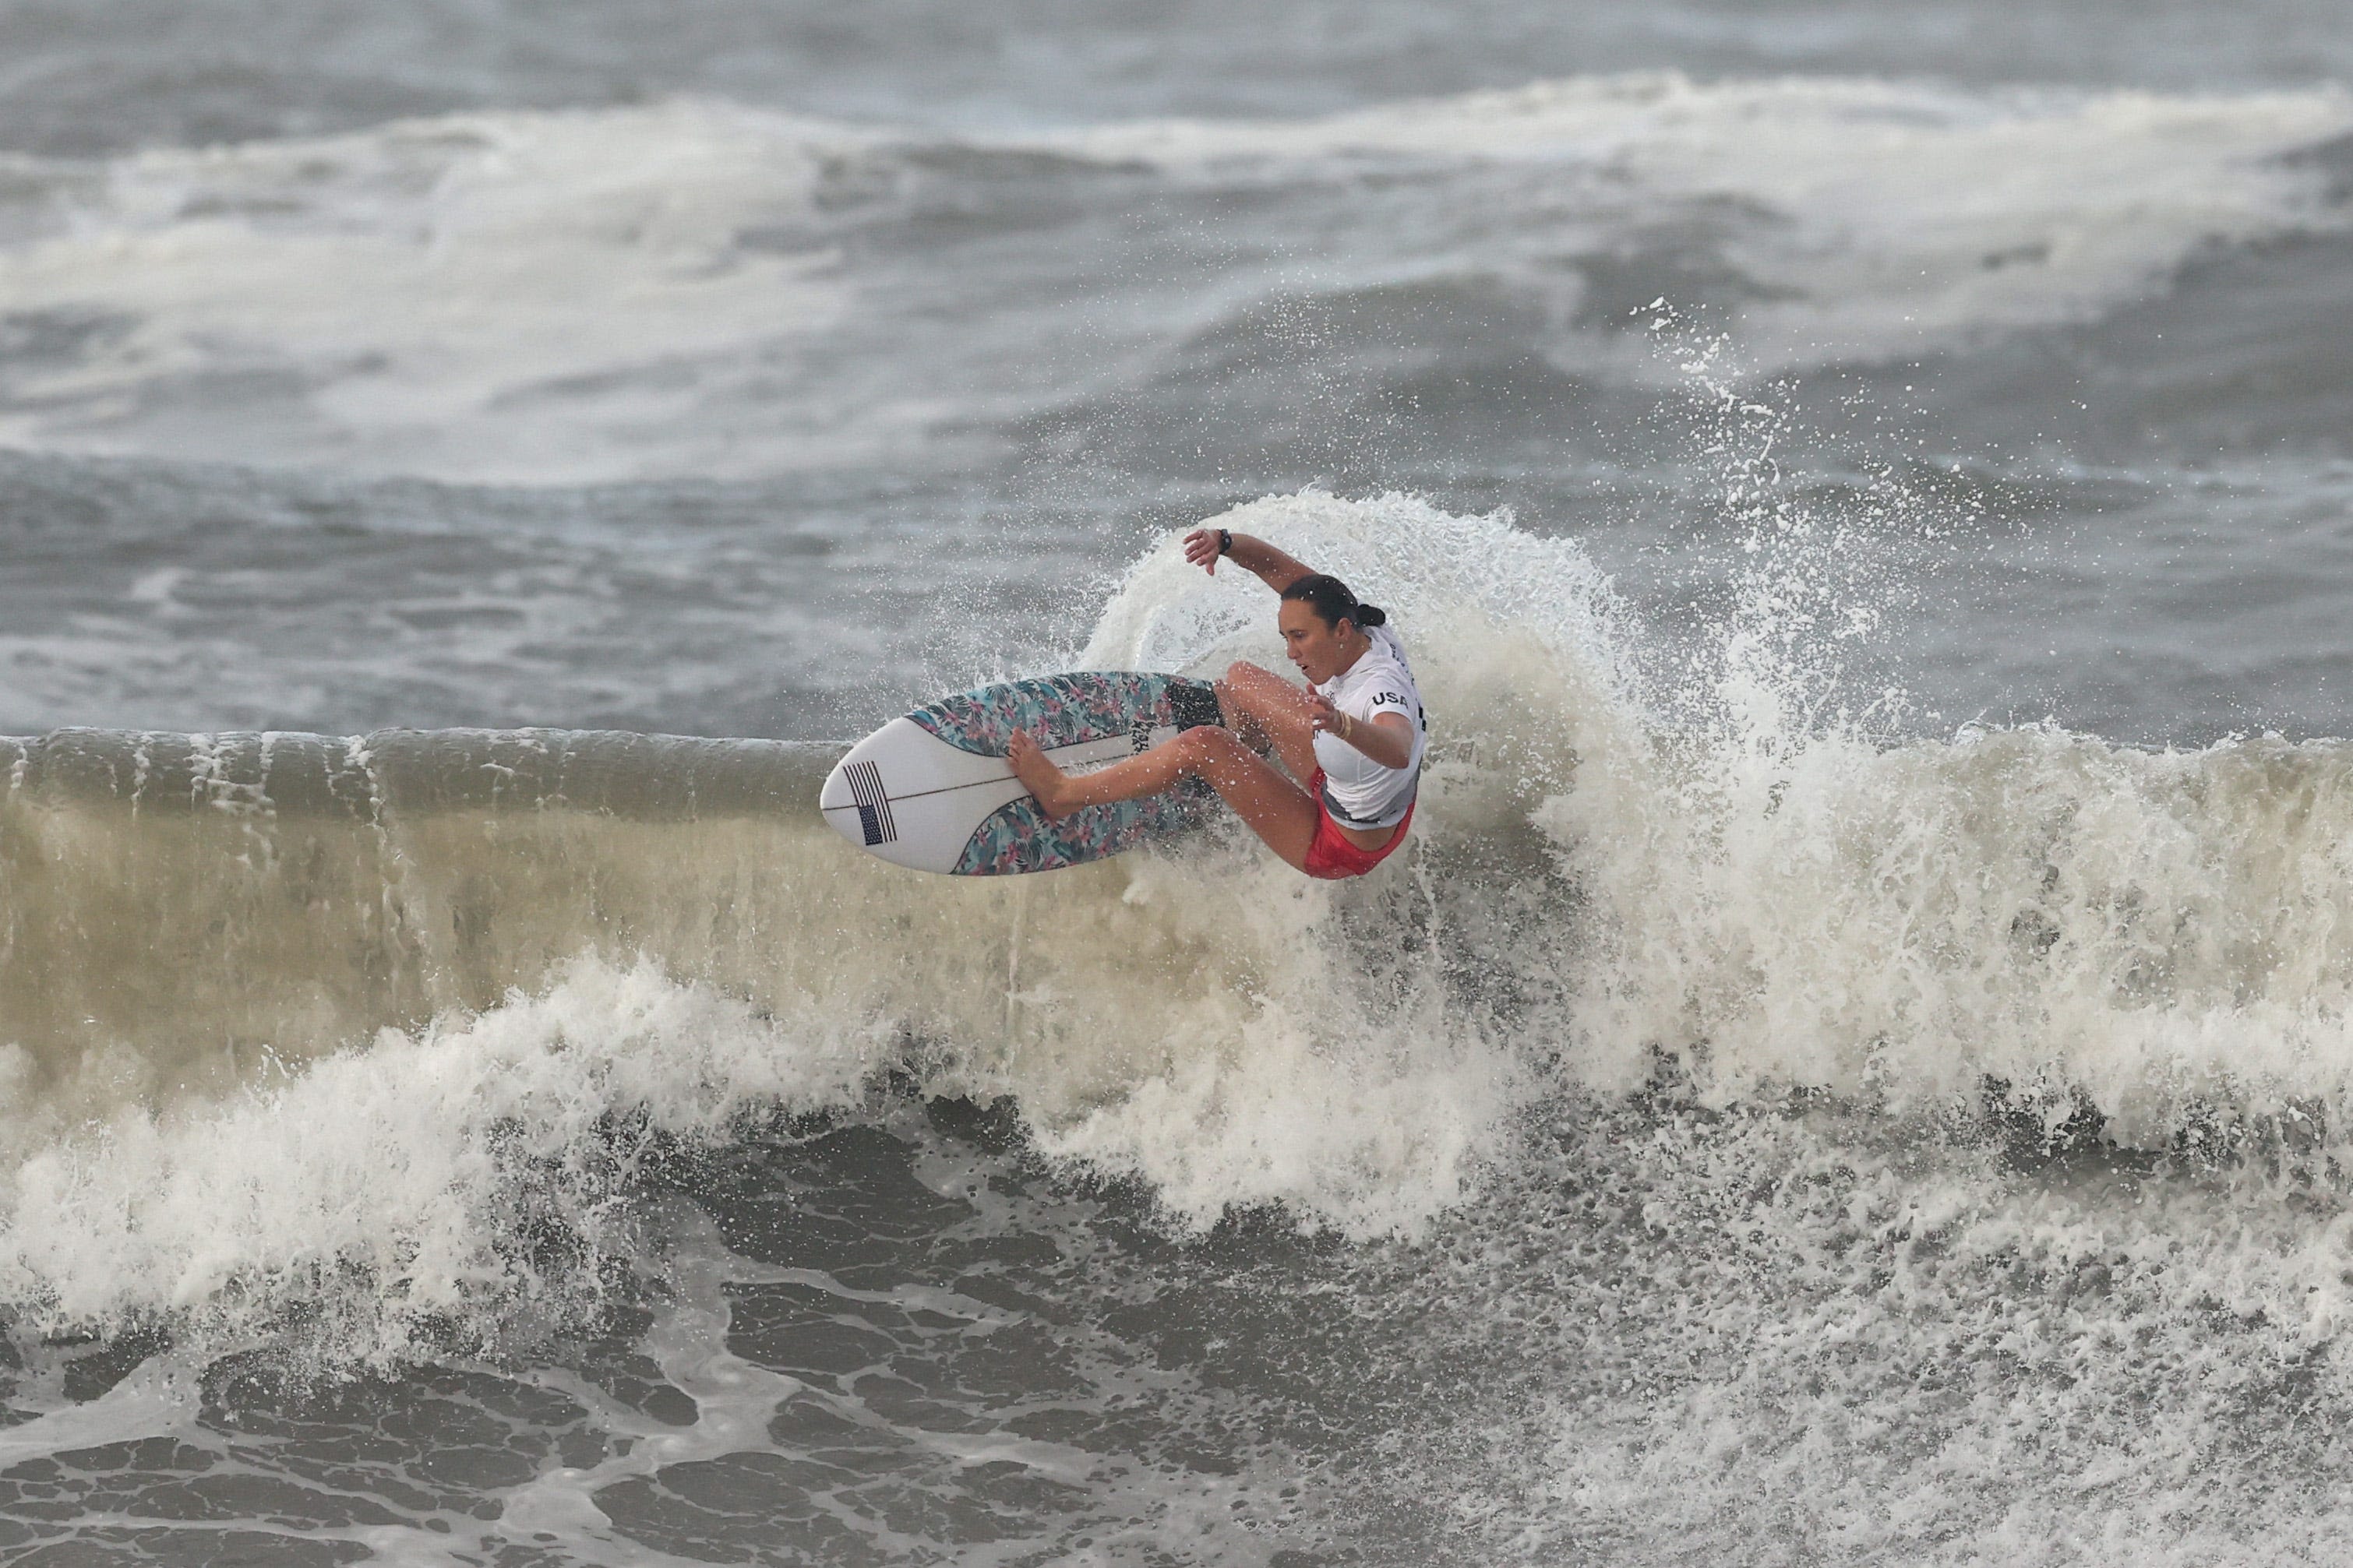 Here's why 2024 Olympic surfing is not taking place in France along with the other events